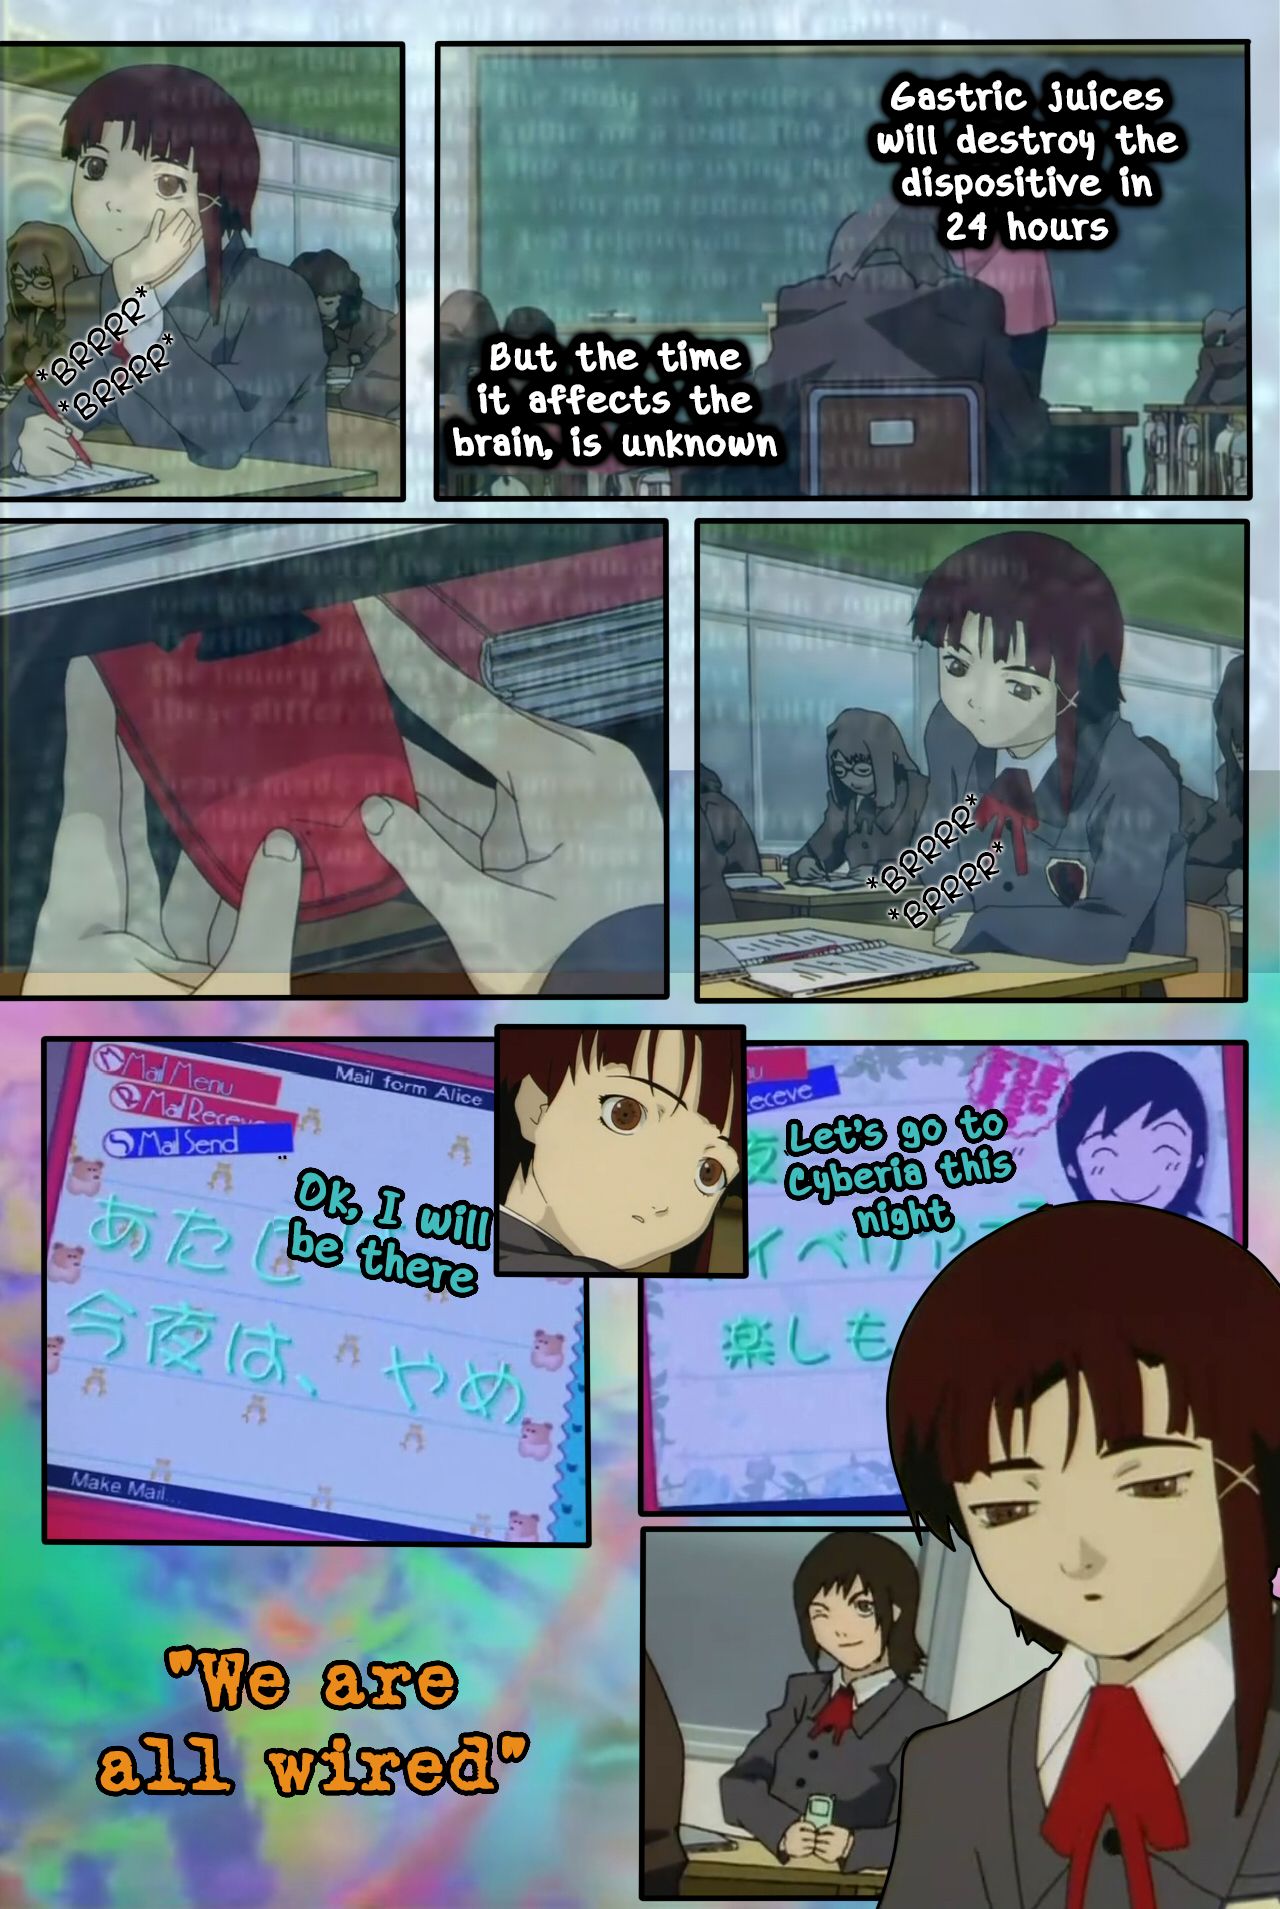 serial experiments lain online free